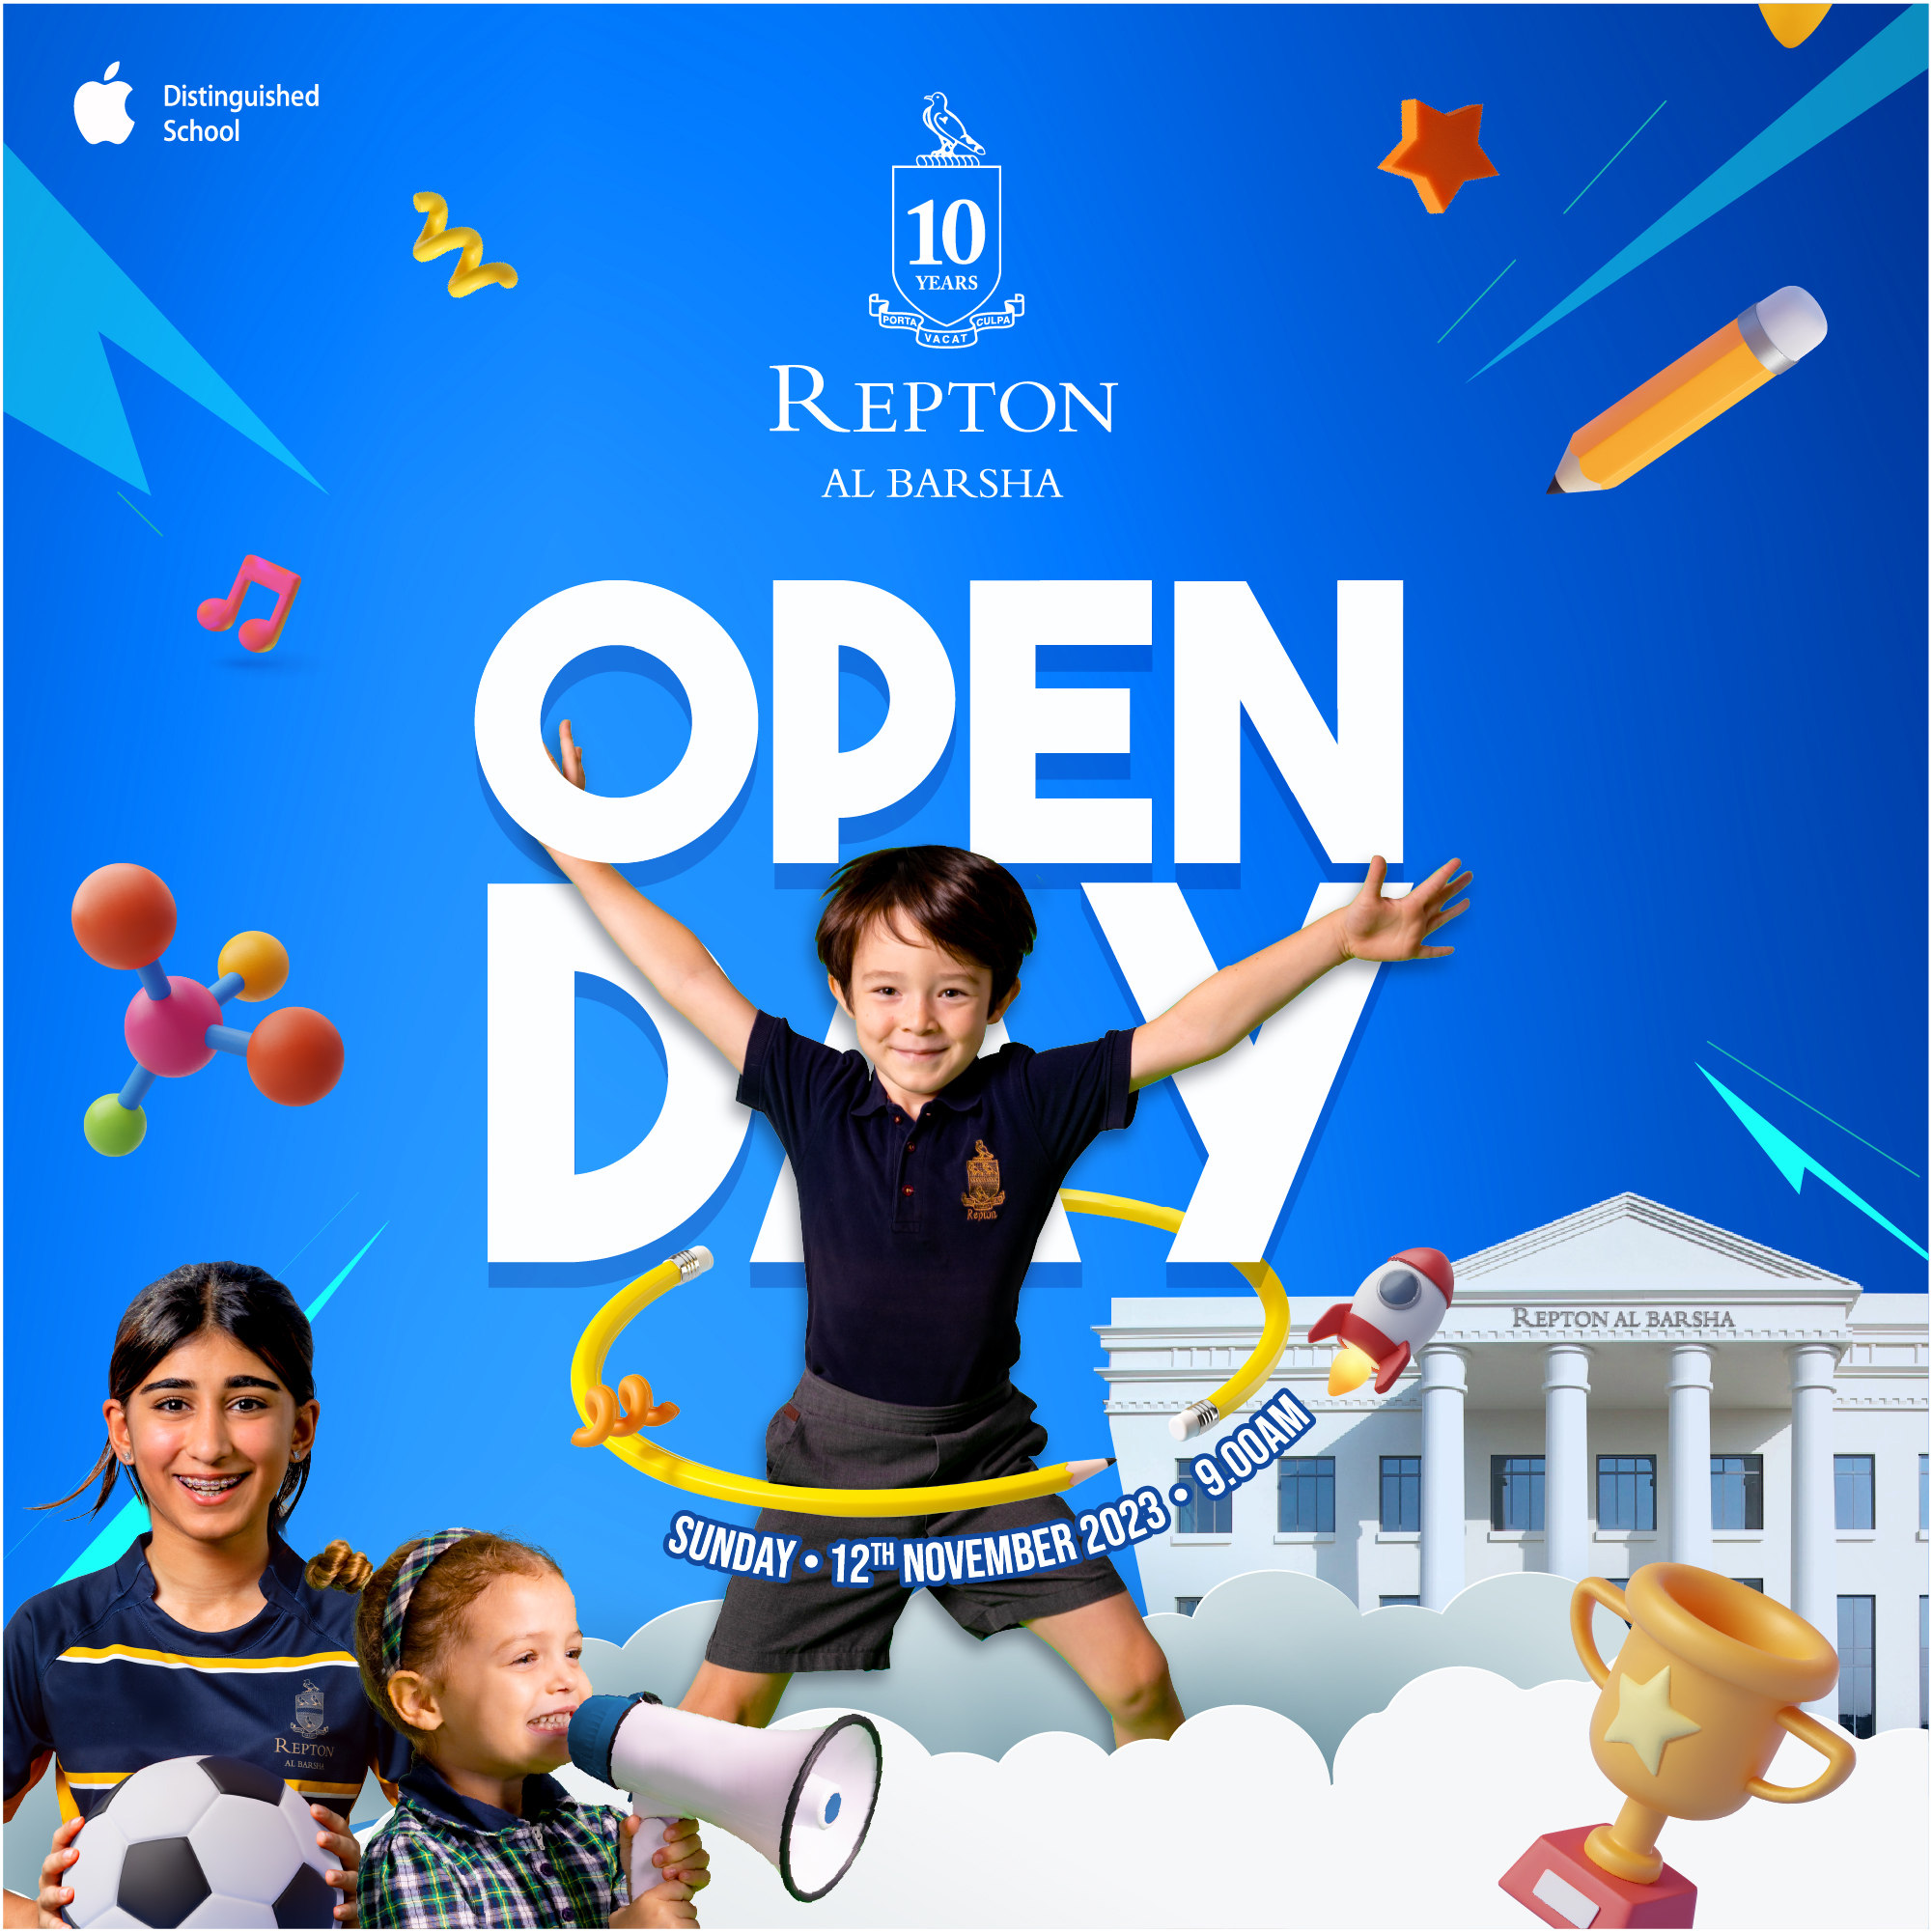 Repton School Dubai Announces Remarkable Partnership with Number 1 Tennis  Academy in the World